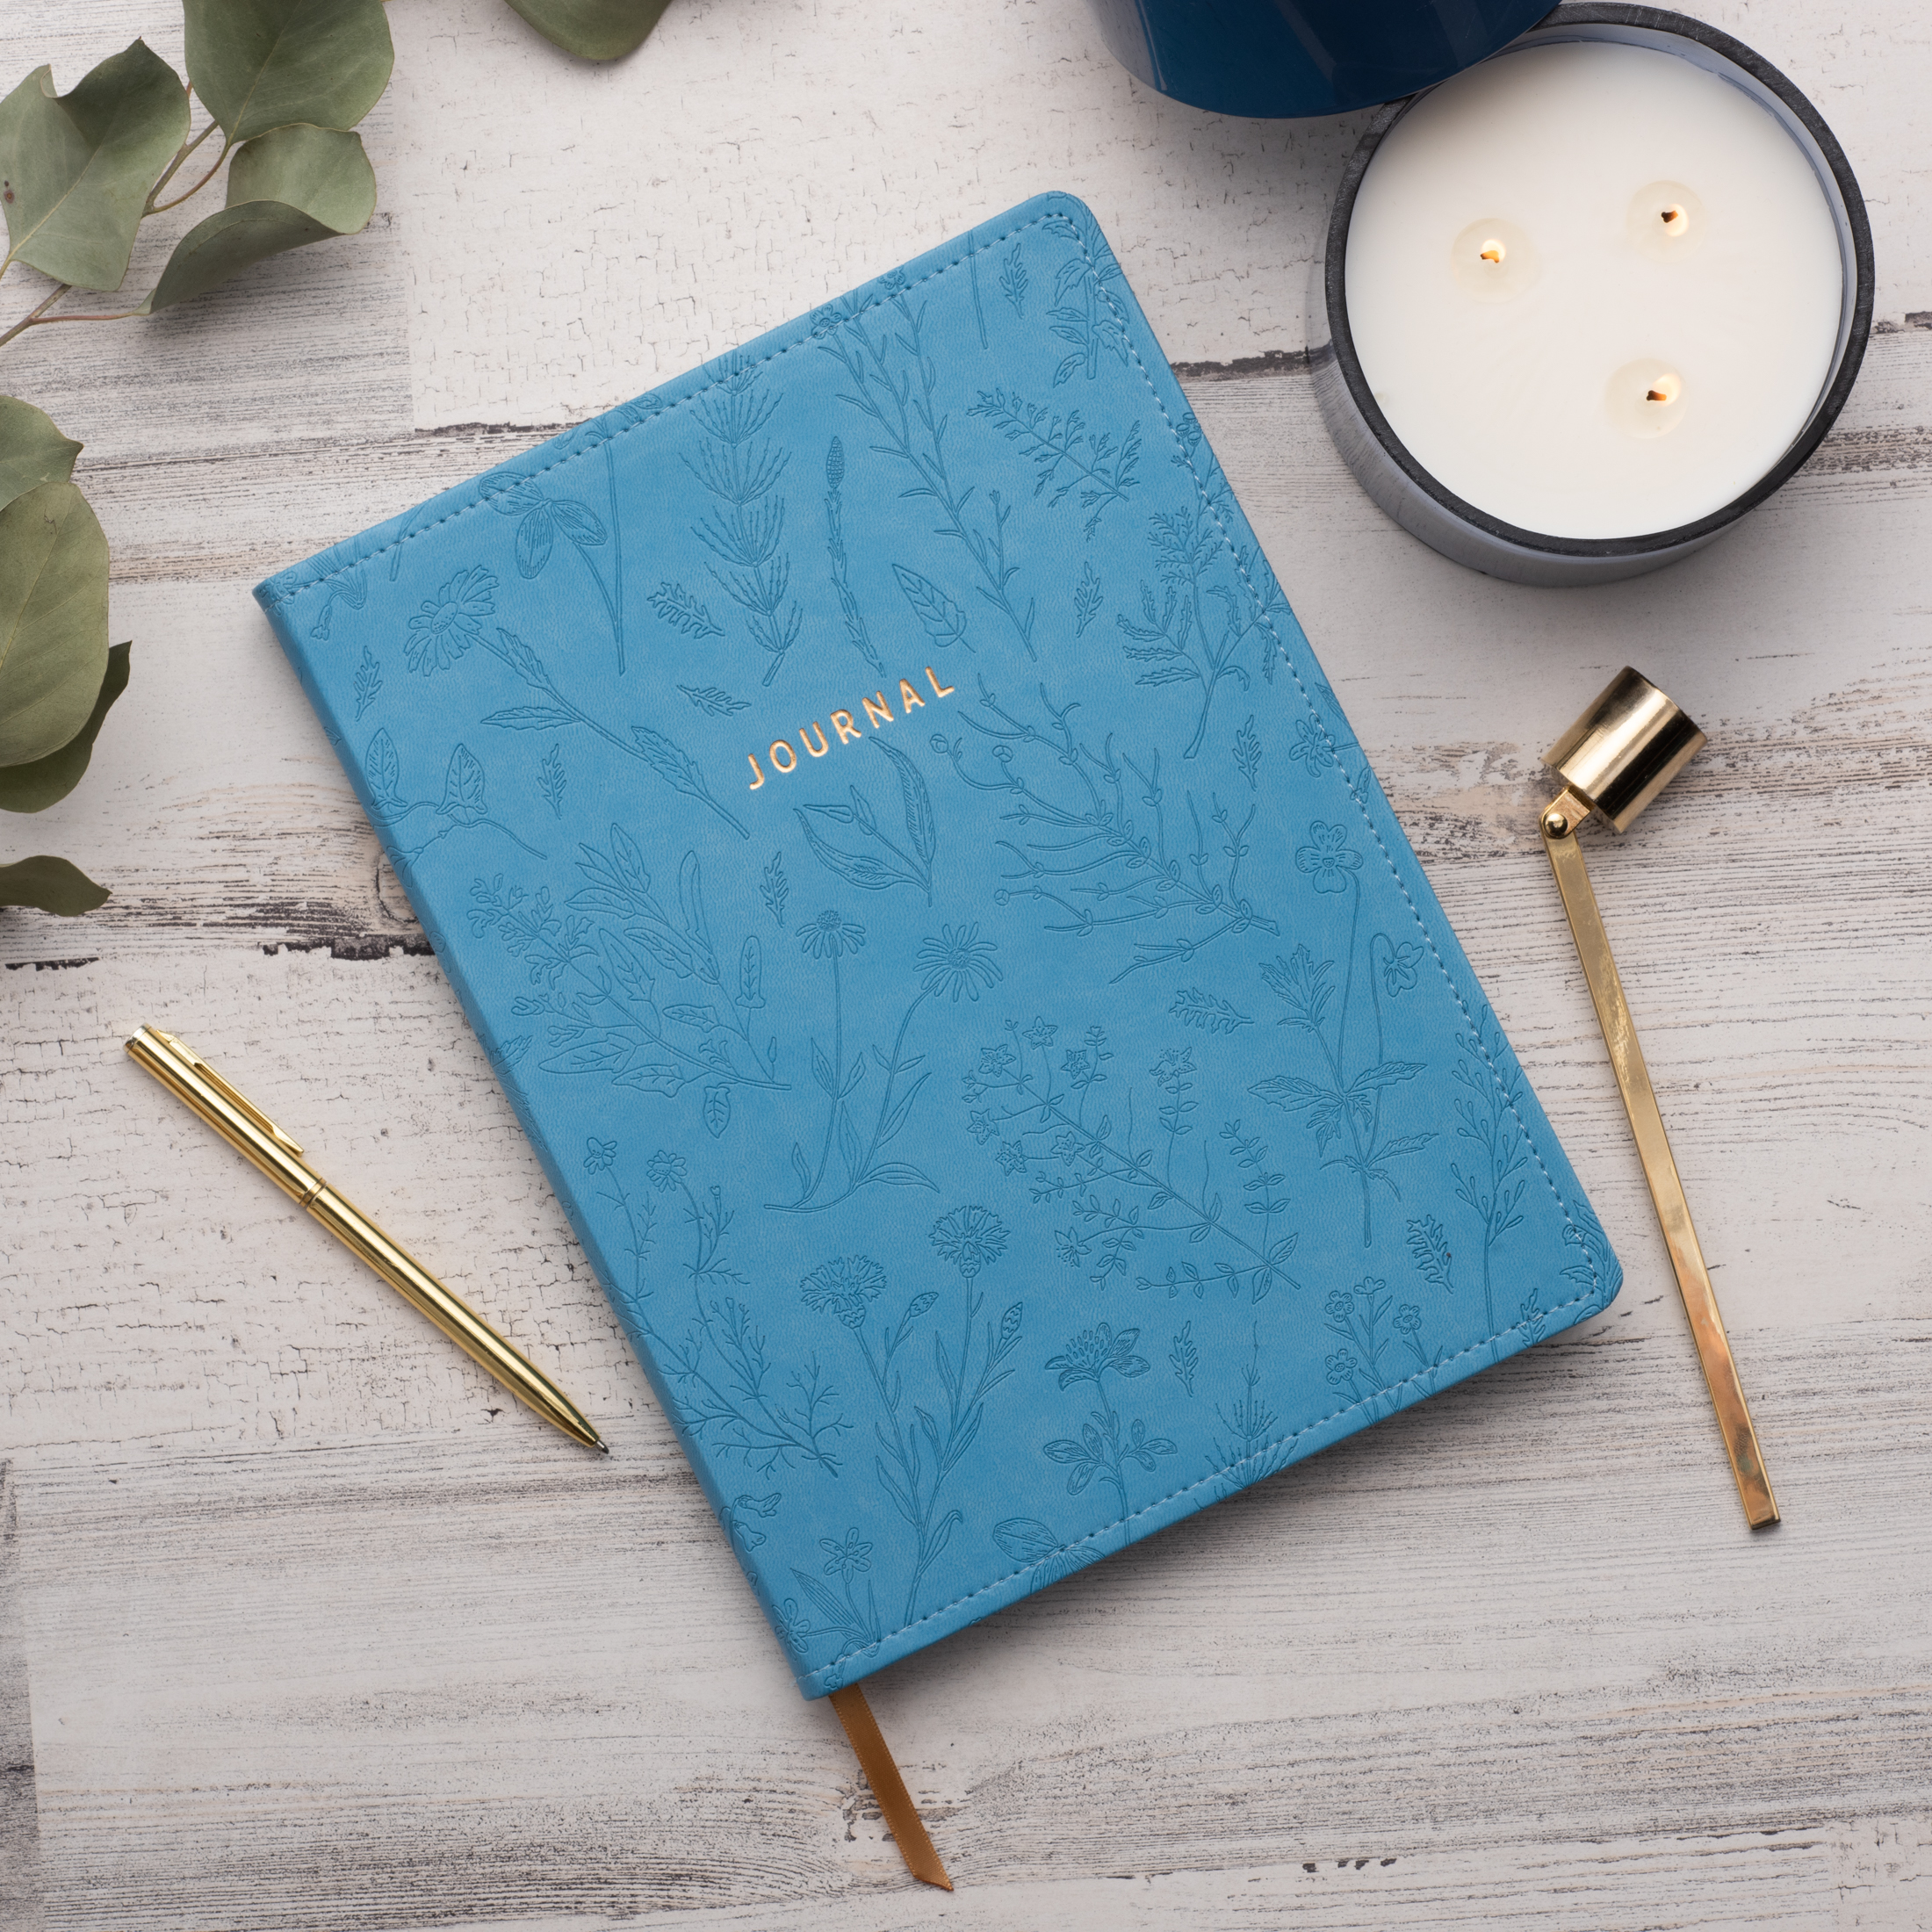 Pen + Gear Leatherette Embossed Jumbo Journal, Blue, 7.375 x 10.25 x 0.75, 192 Lined Pages